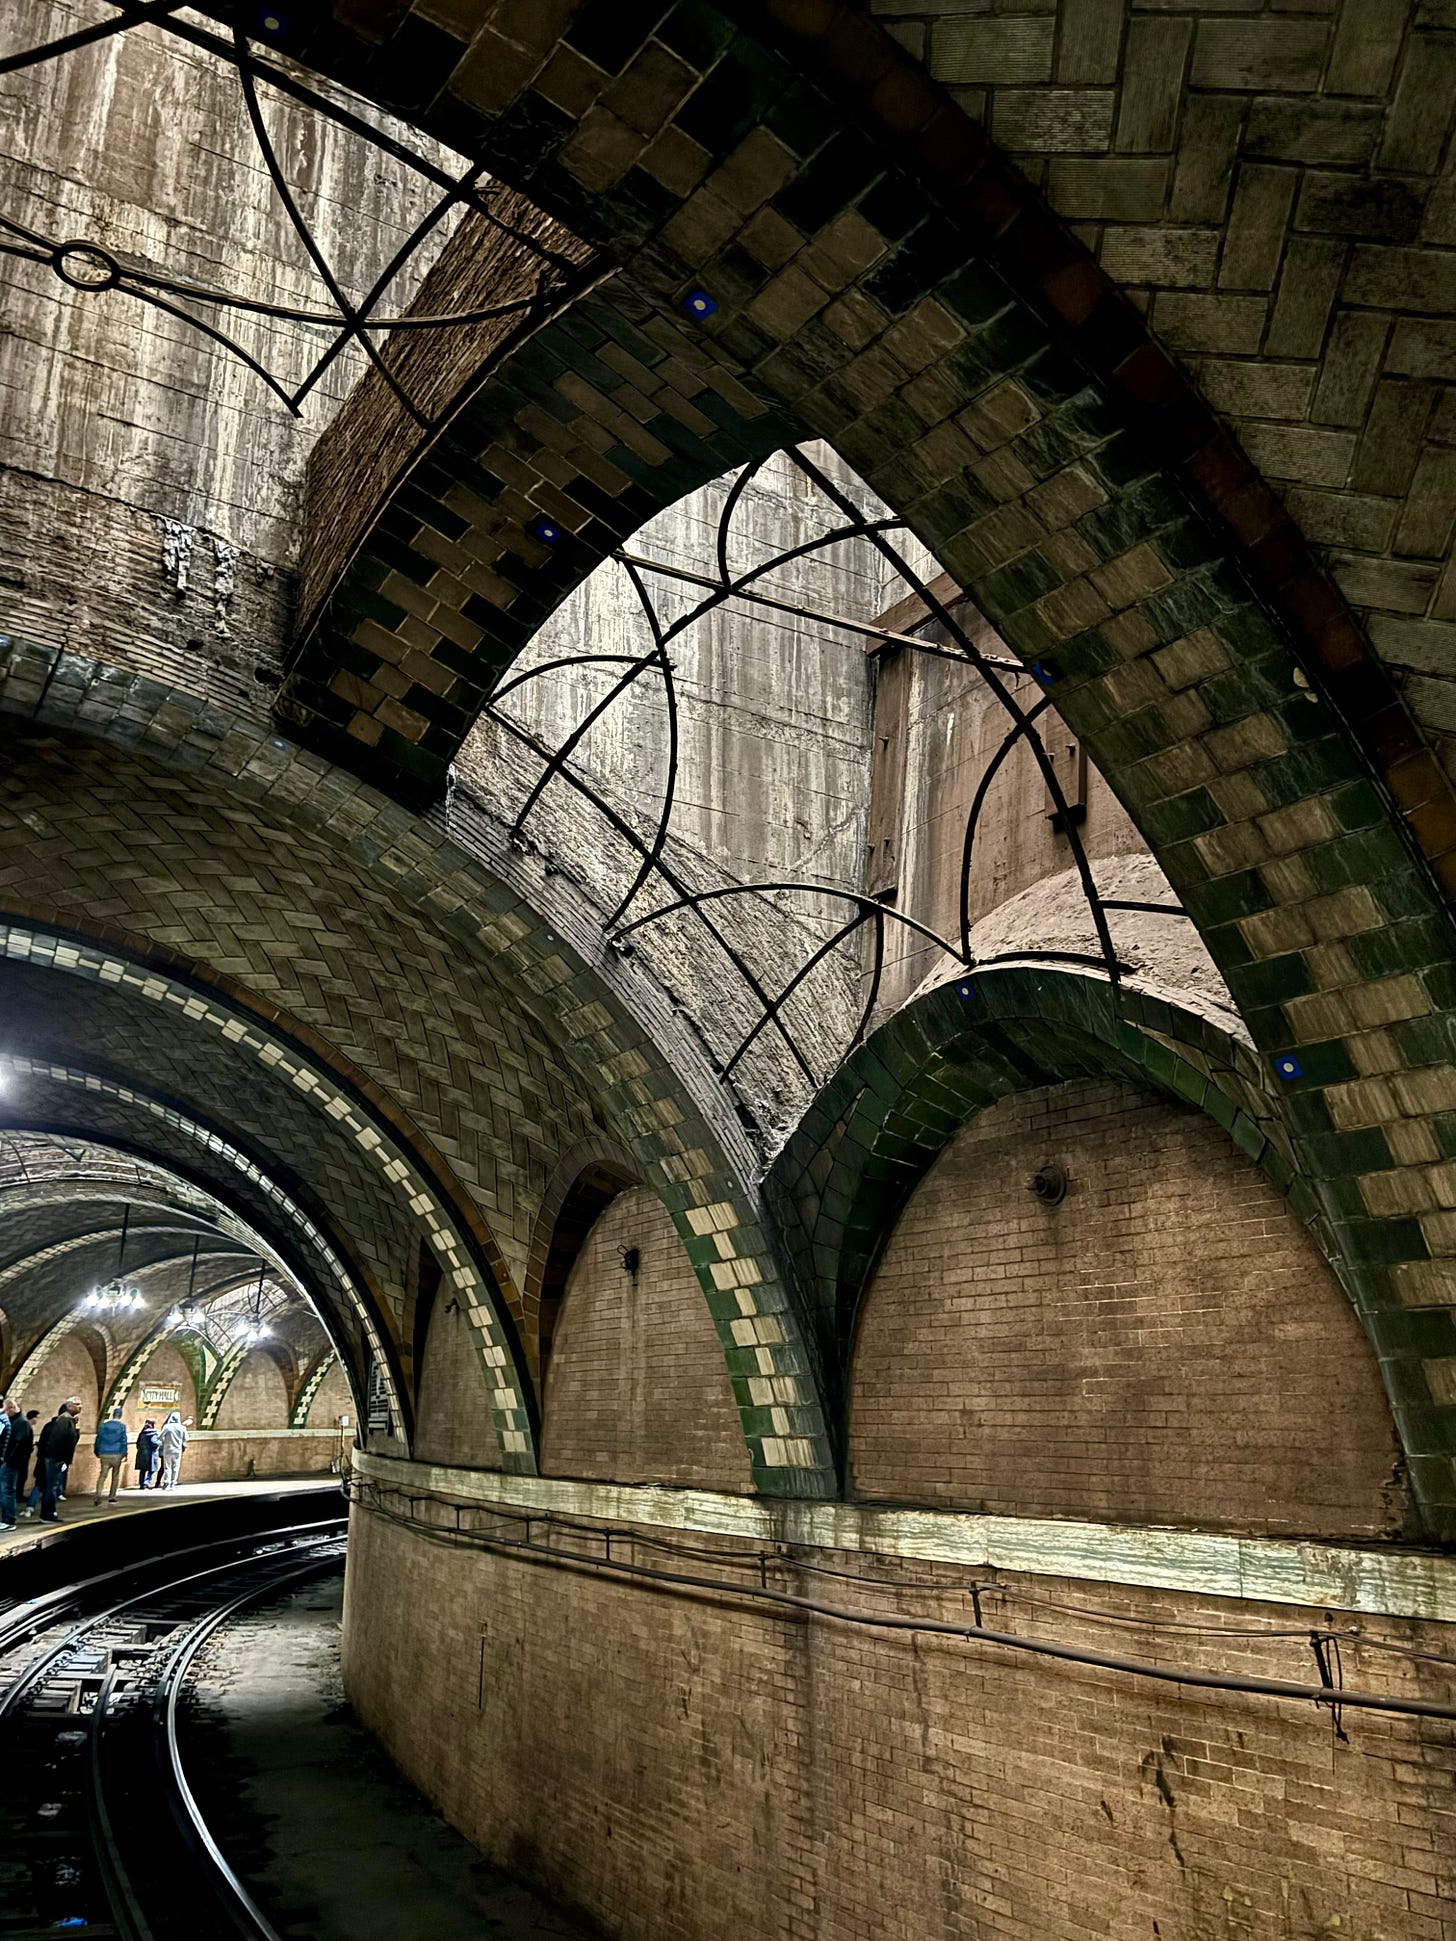 Sunlight coming in through windows in the vaulted ceiling over the subway tracks.